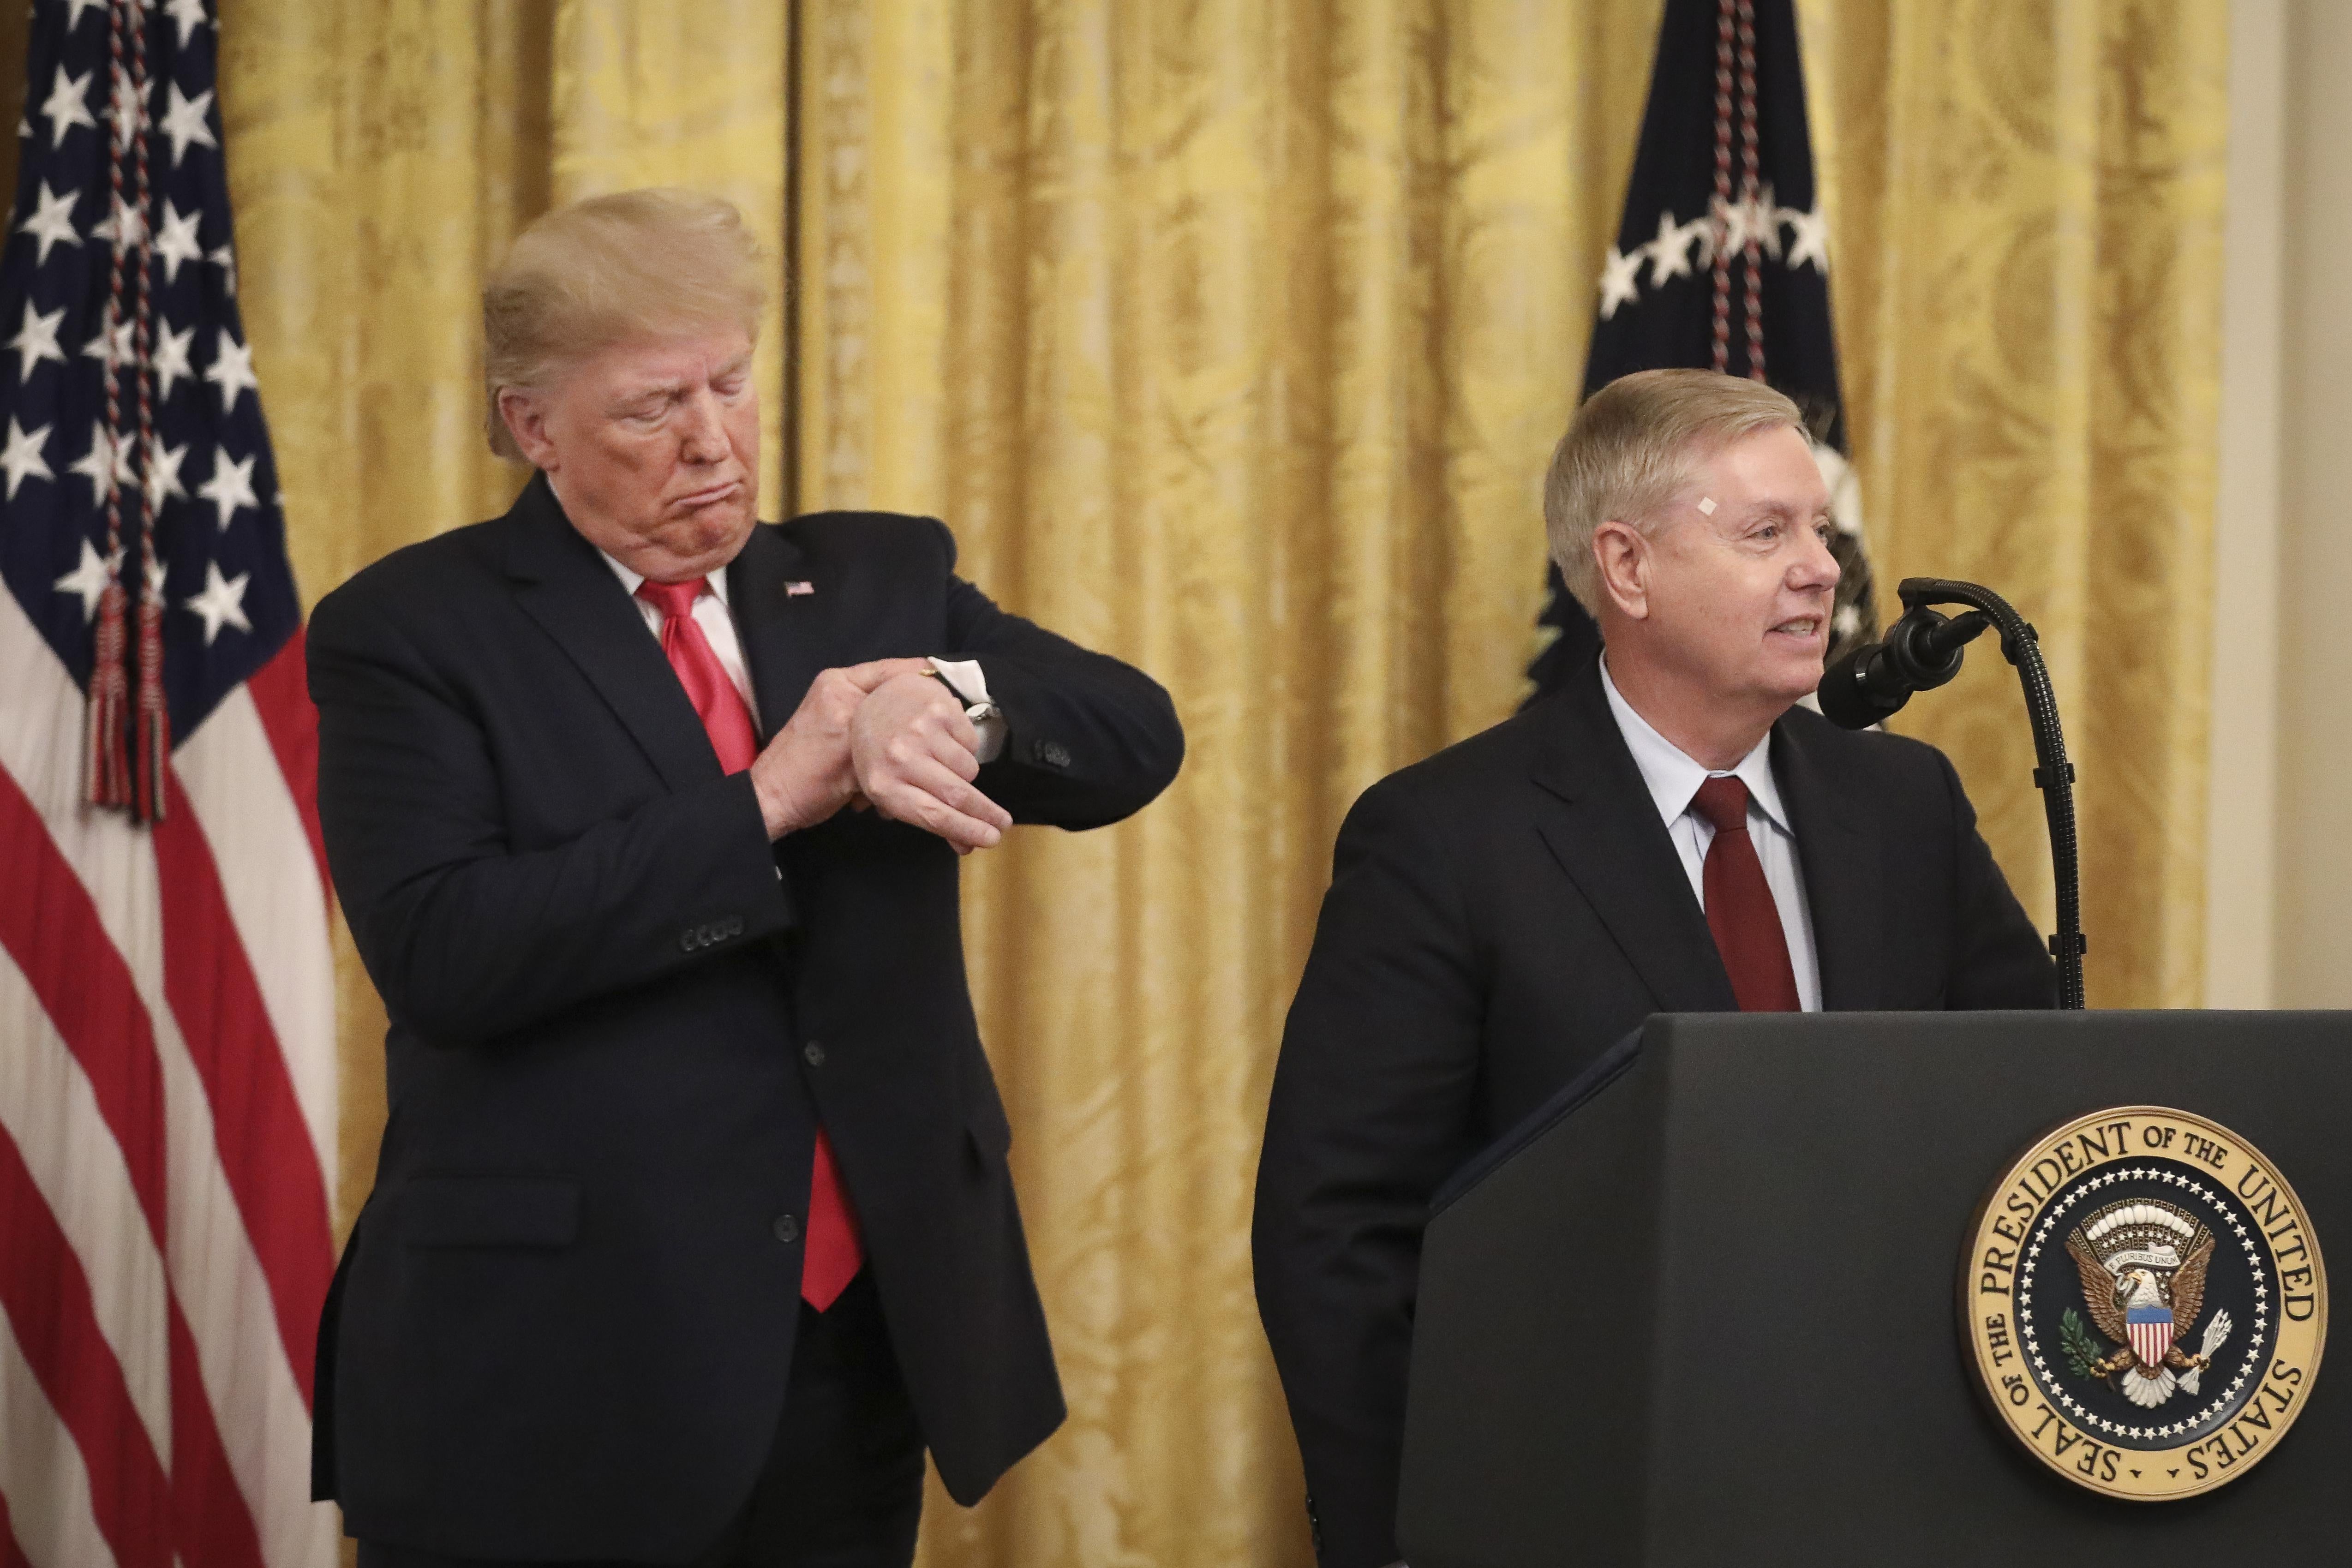 Donald Trump checks his watch  as he stands behind Lindsey Graham, who is at a lectern.